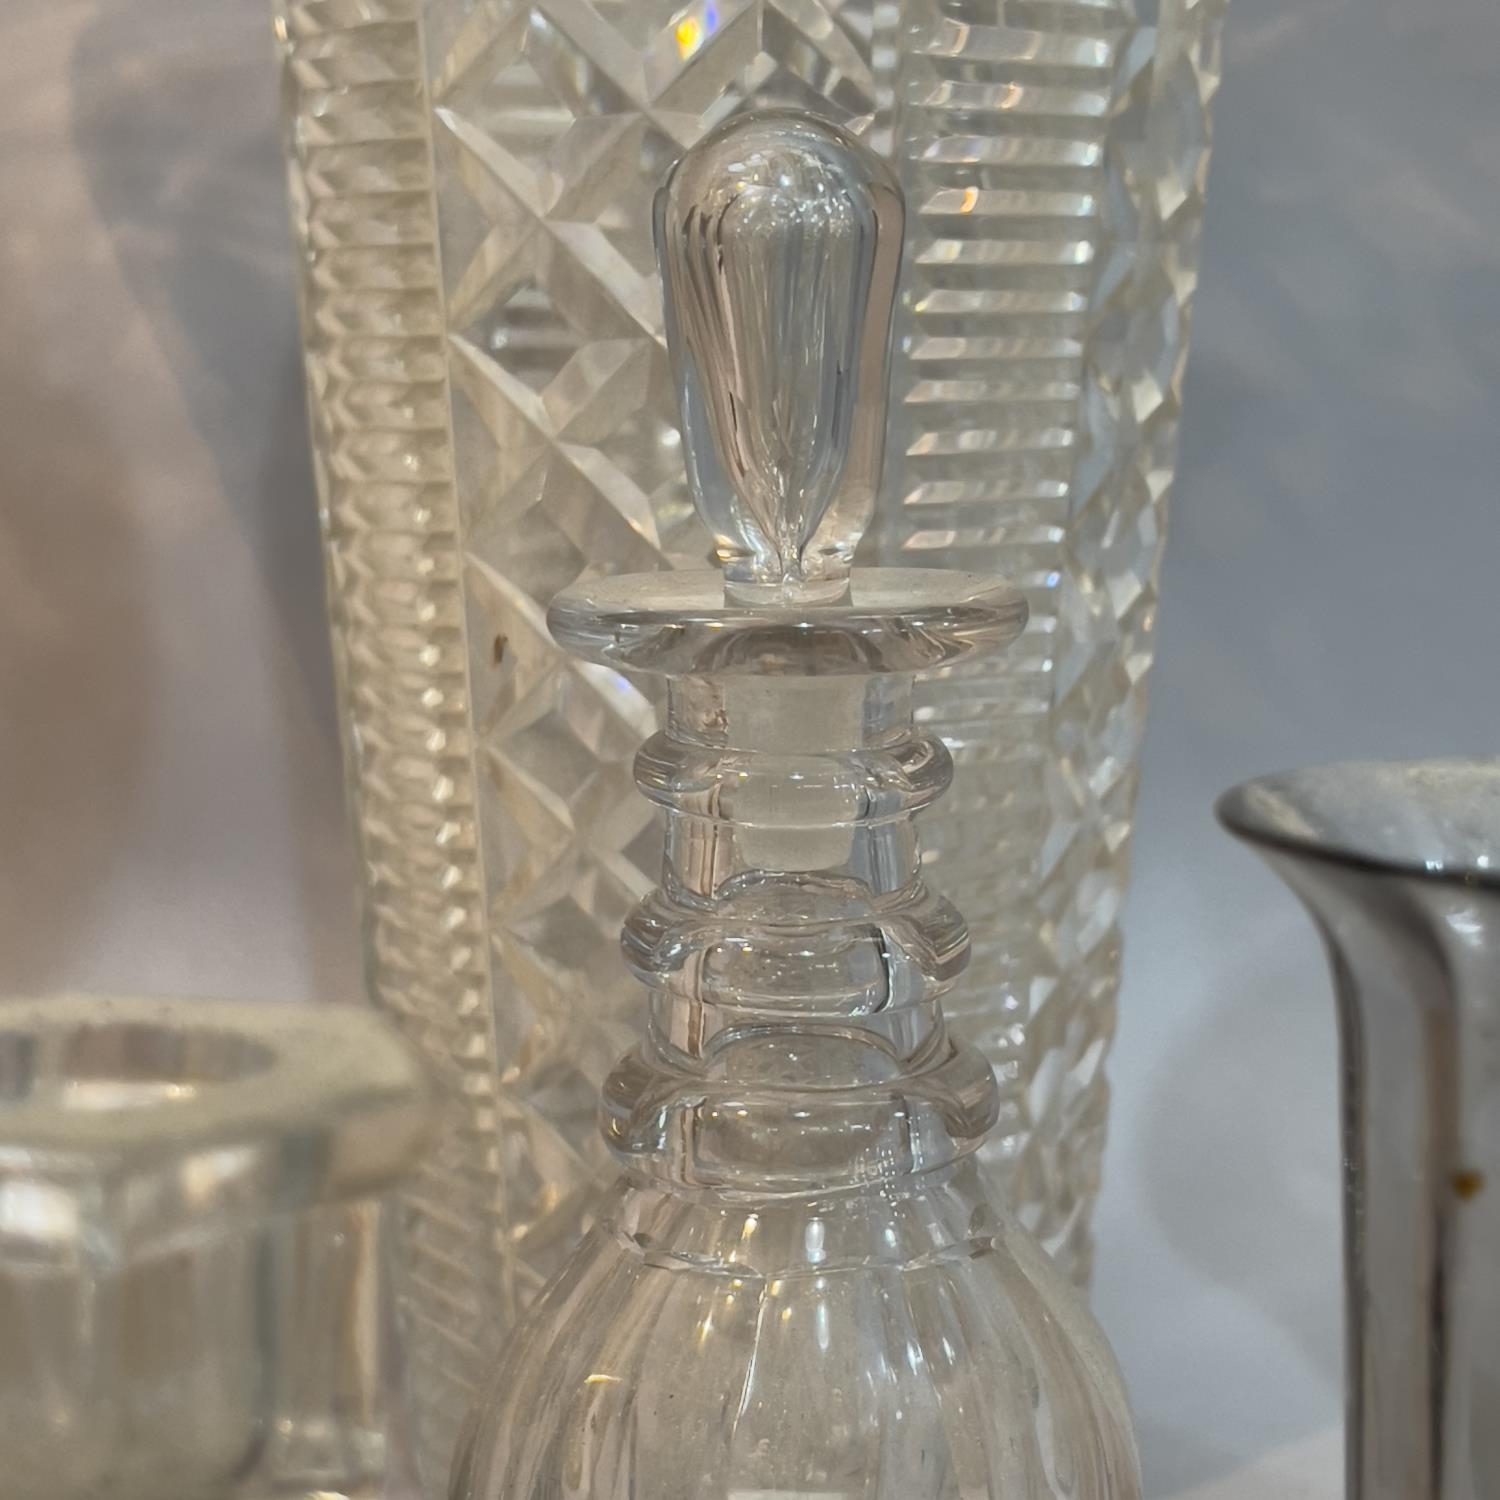 Two cut glass vases 33cm high, two further glass vases of wrythen form, a small decanter and stopper - Image 2 of 2